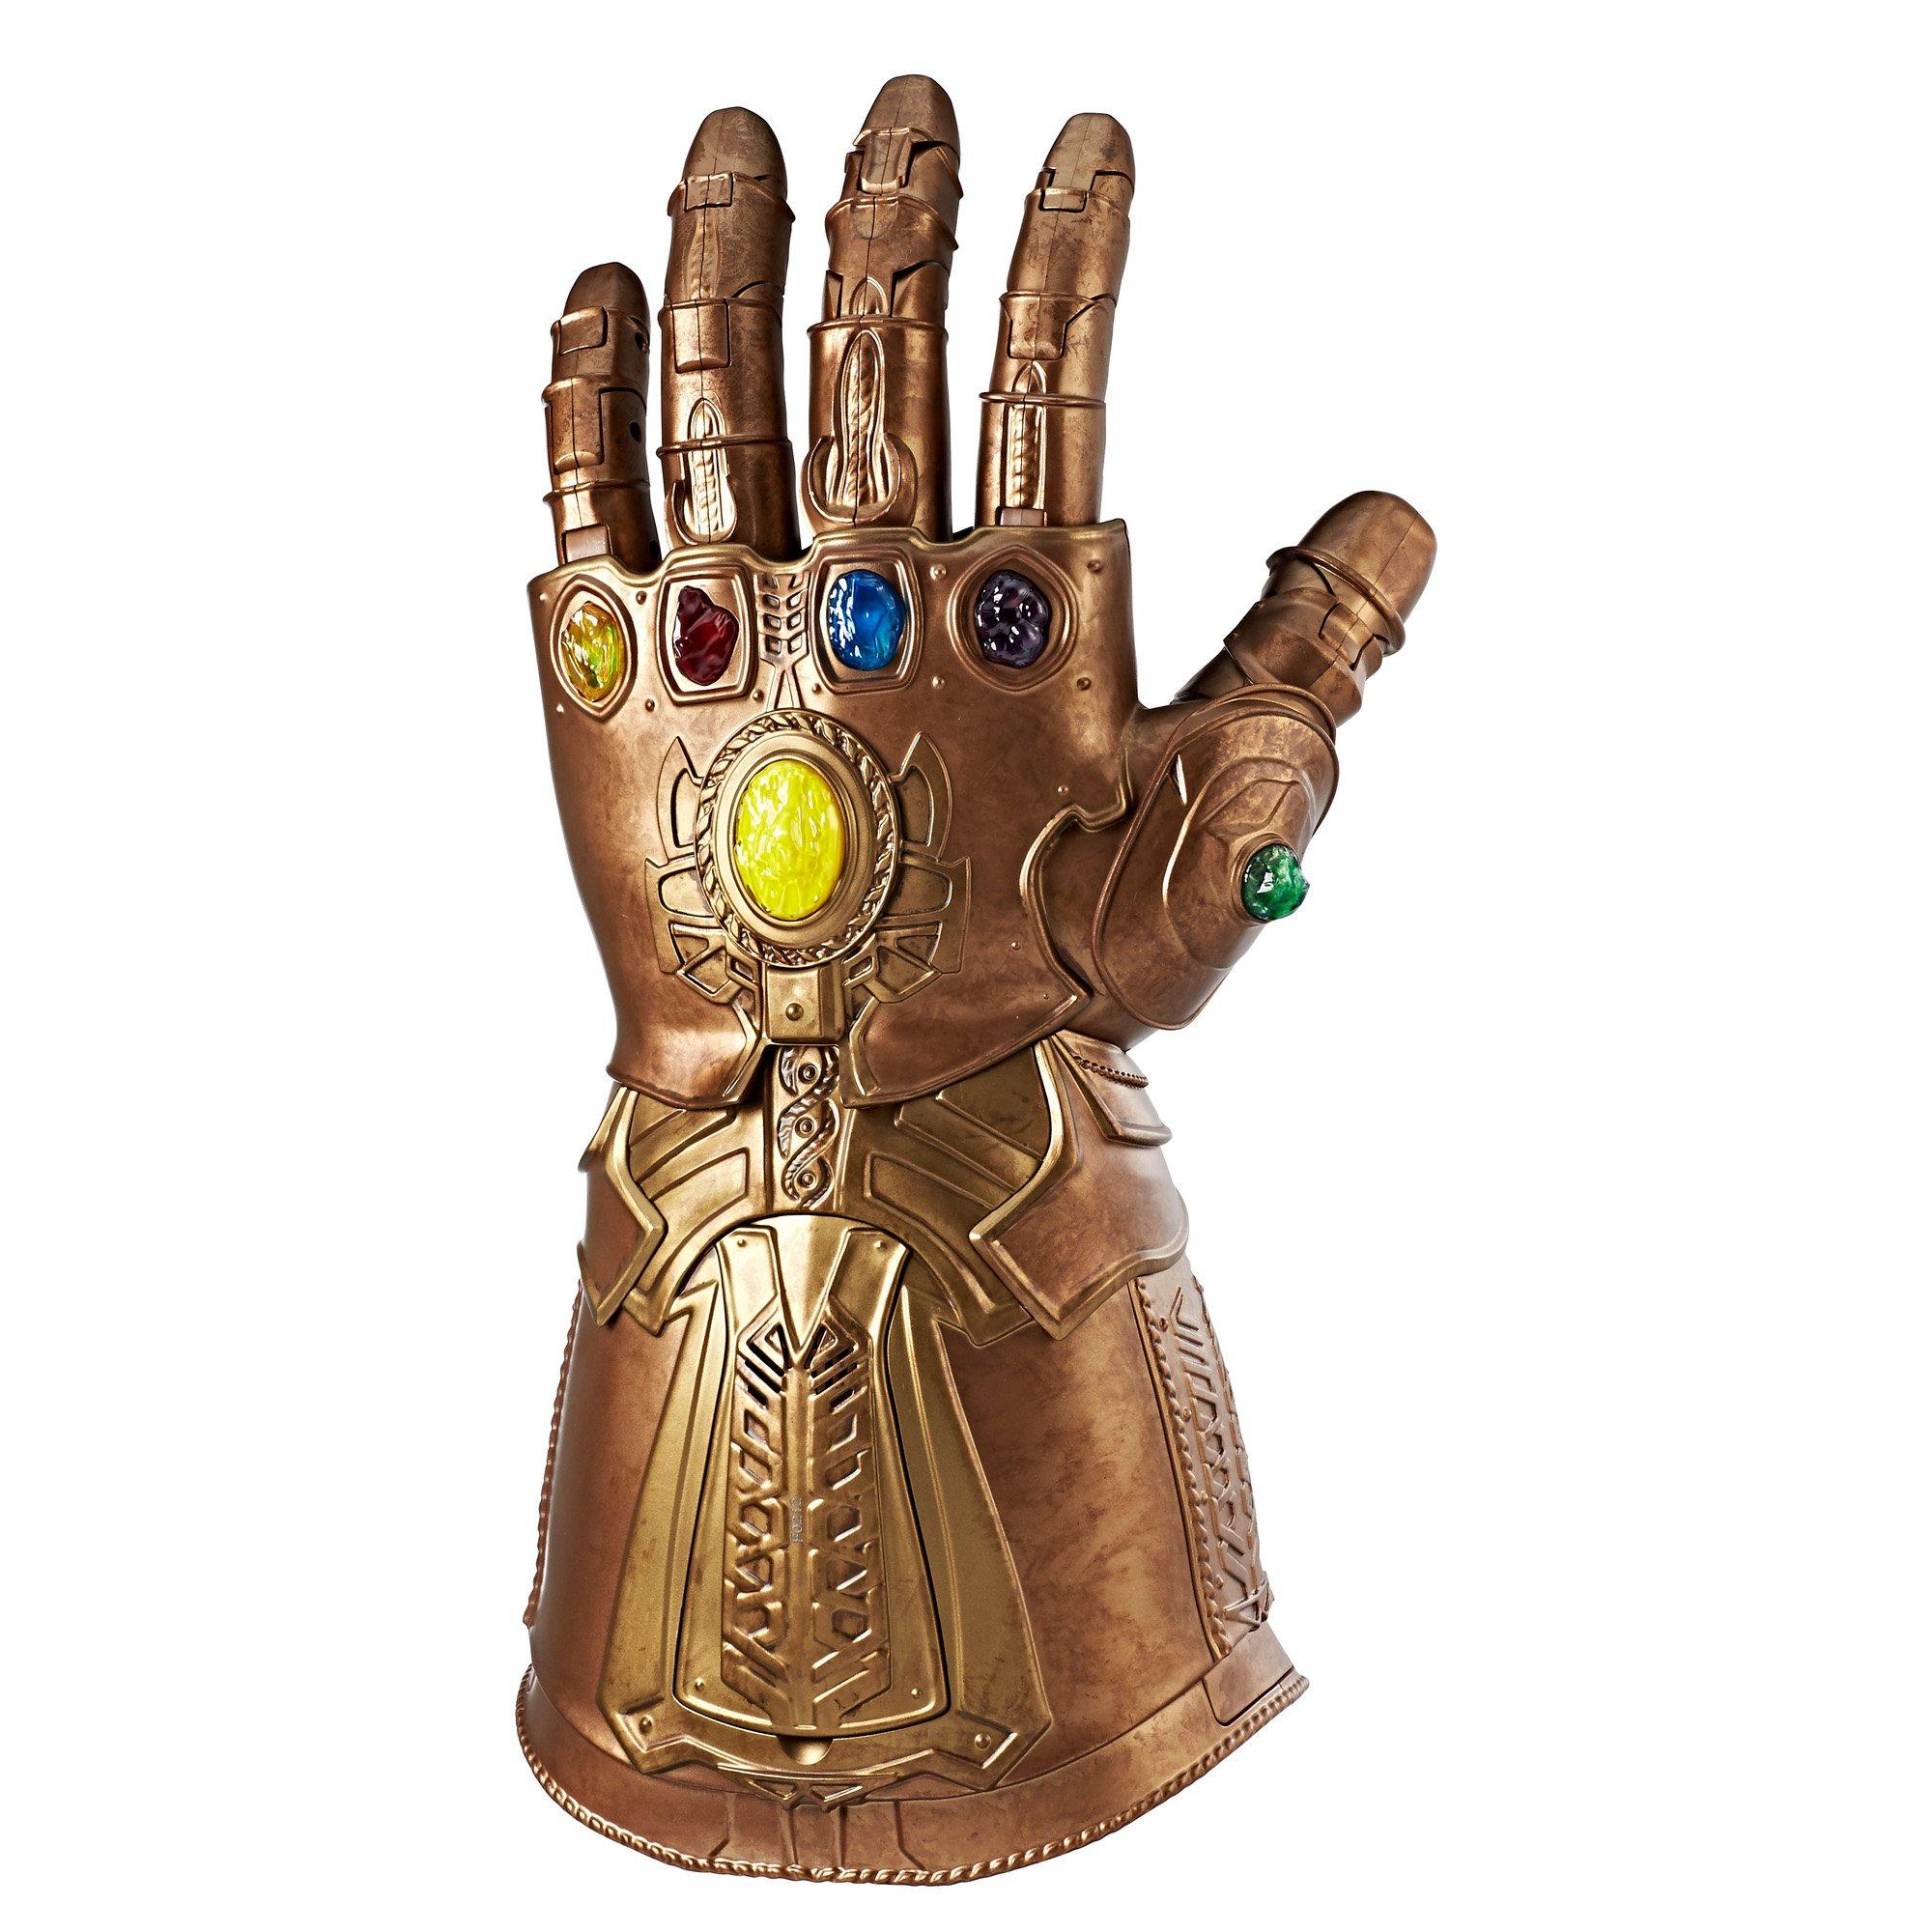 How to get thanos glove in roblox